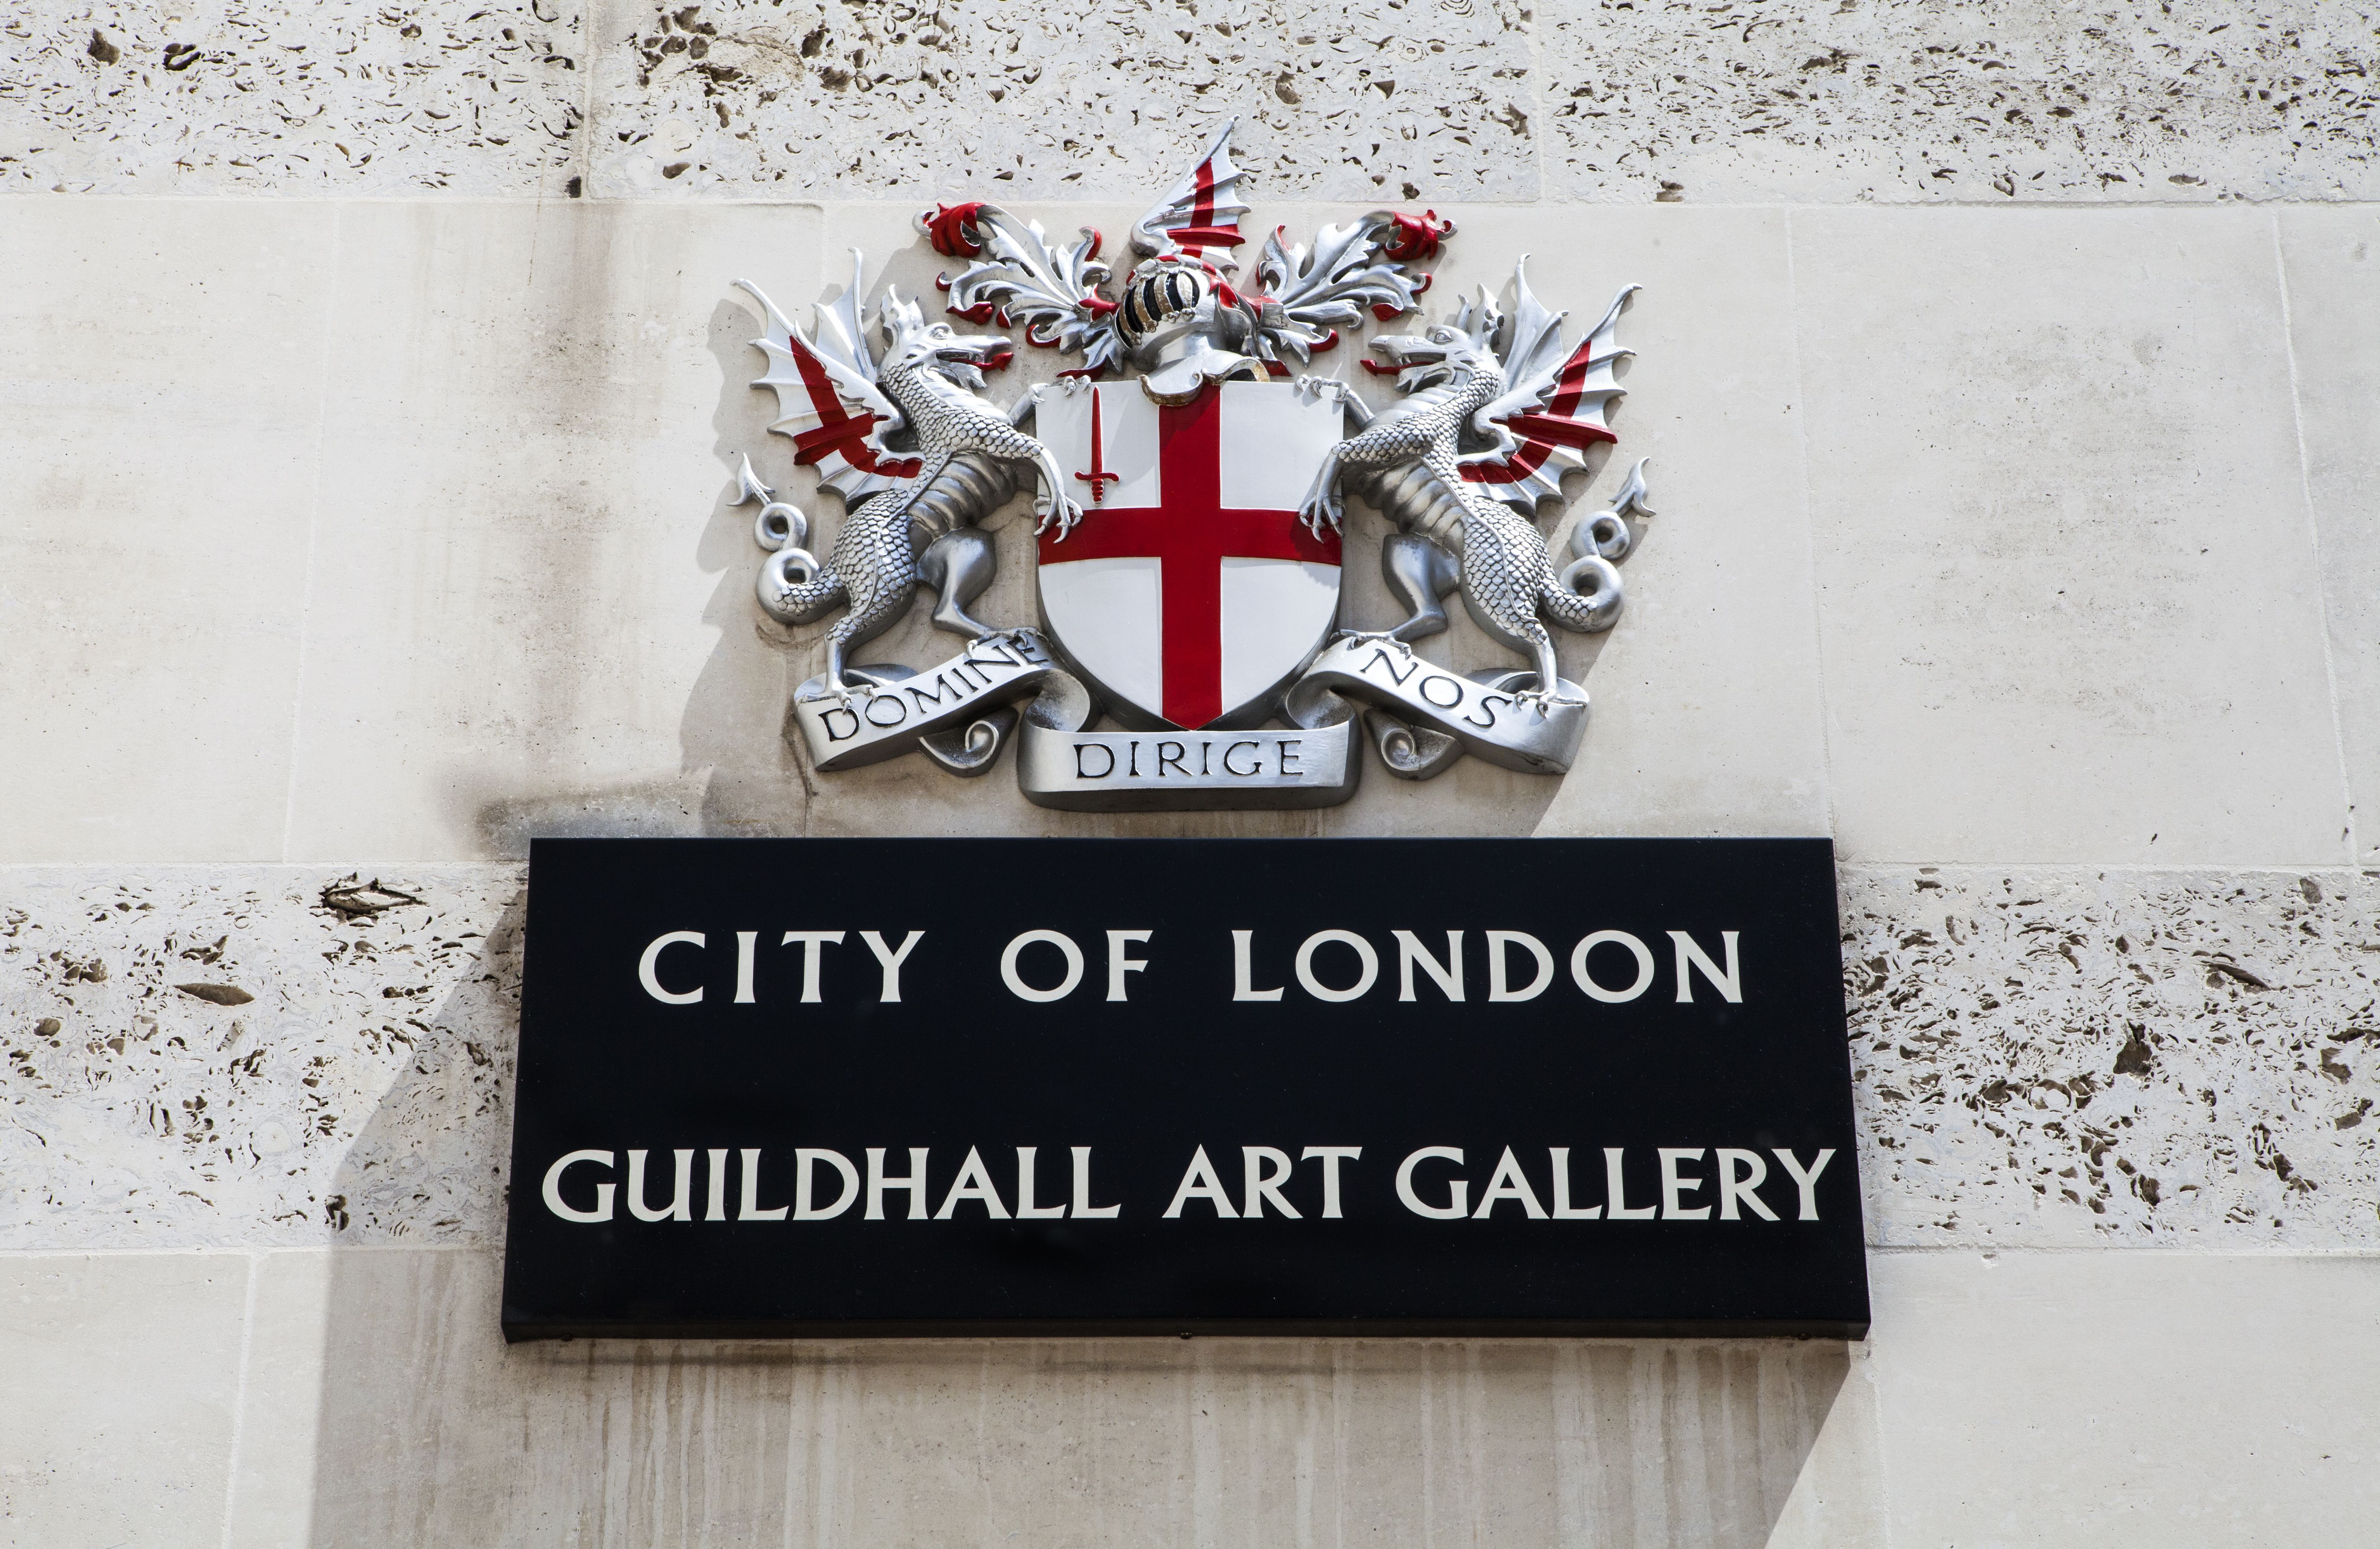 The entrance sign to the Guildhall Art Gallery in the City of London